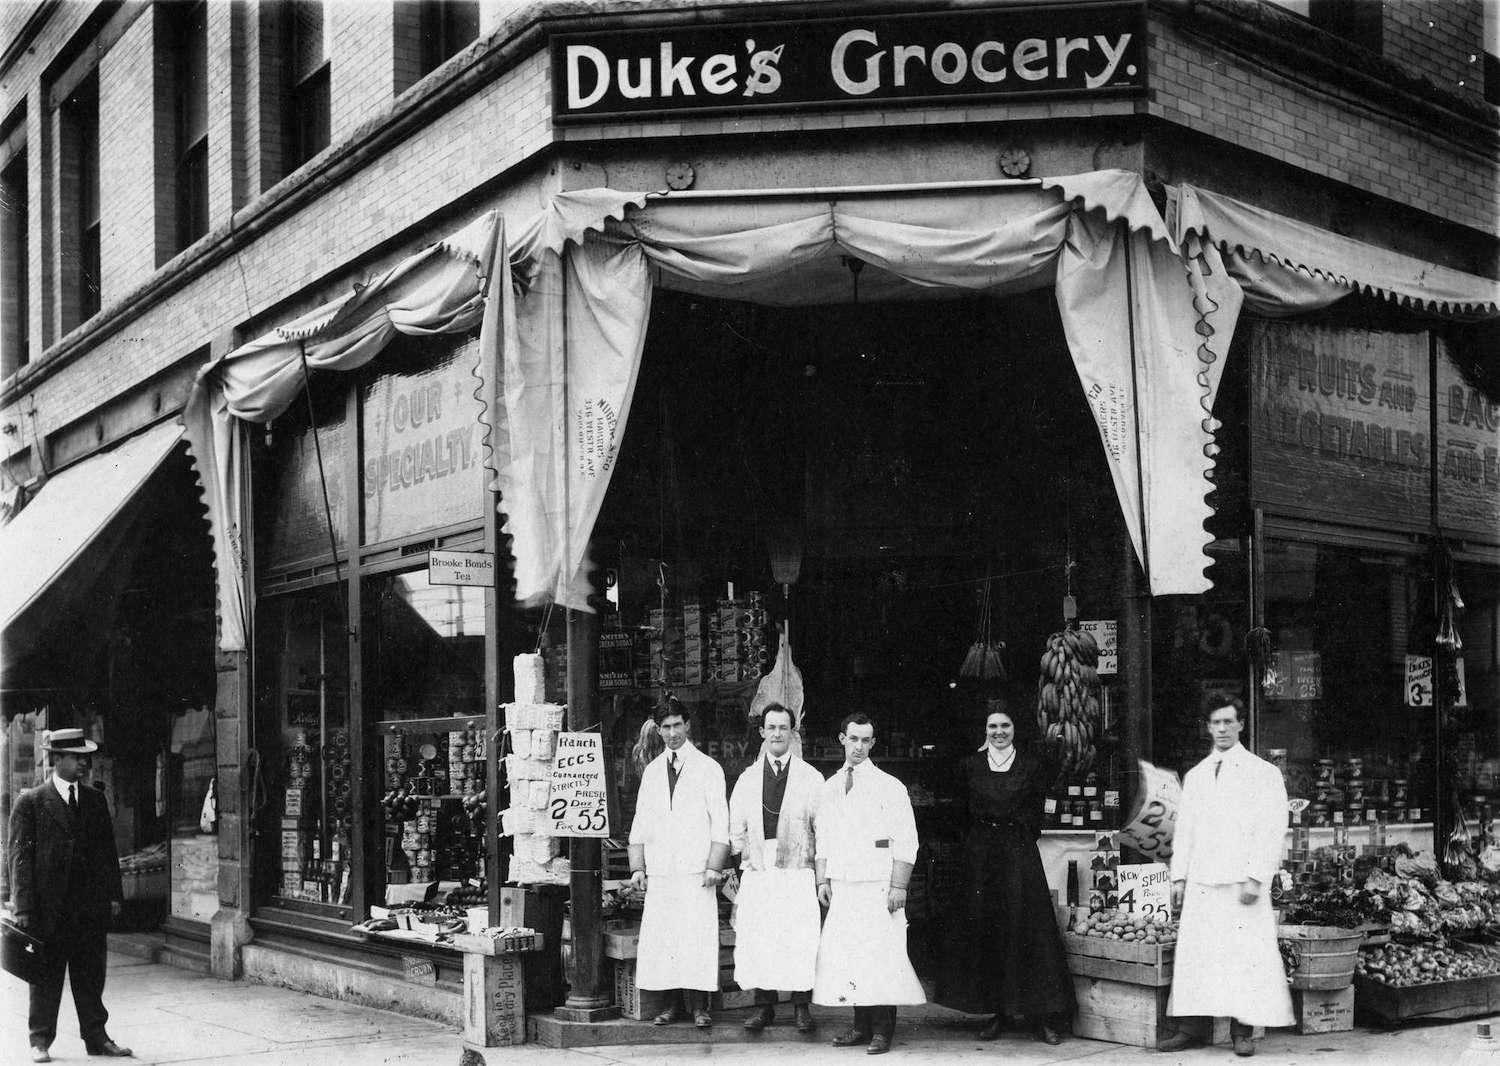 1911 - Duke's Grocery staff posing in front of store at the comer of Gore Avenue and Hastings Street